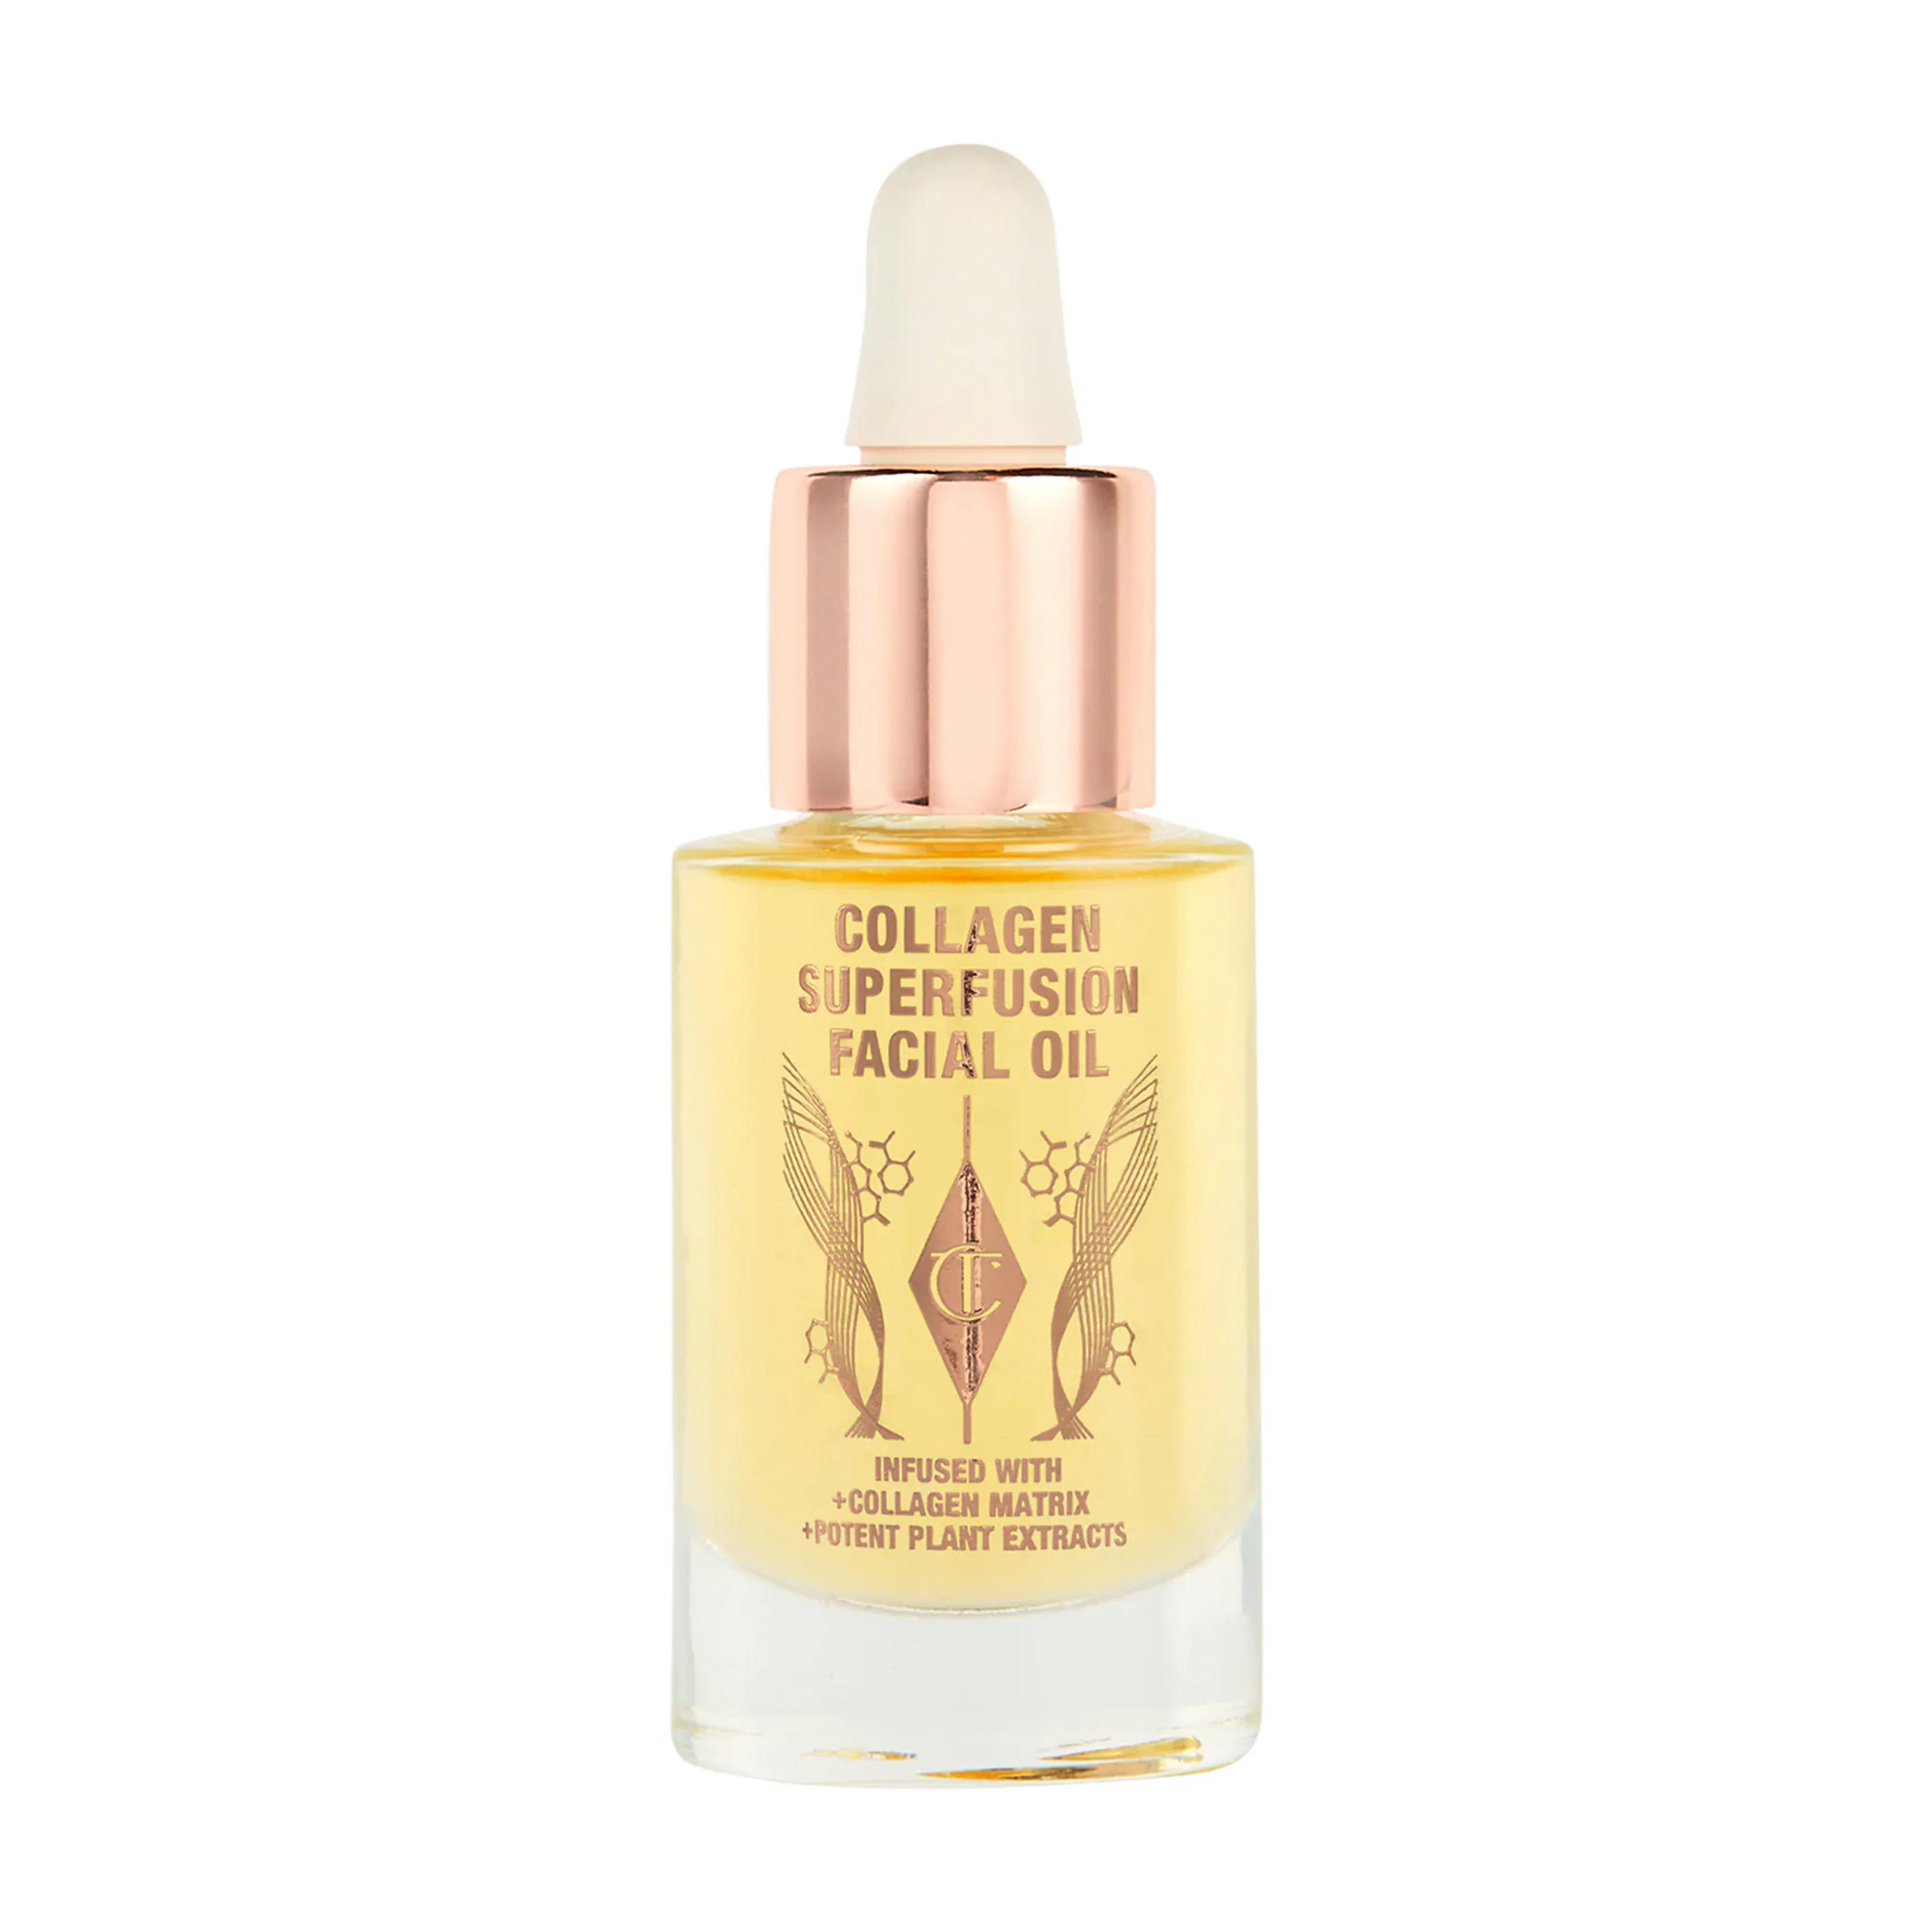 Mini Collagen Superfusion Firming & Plumping Facial Oil - Charlotte Tilbury